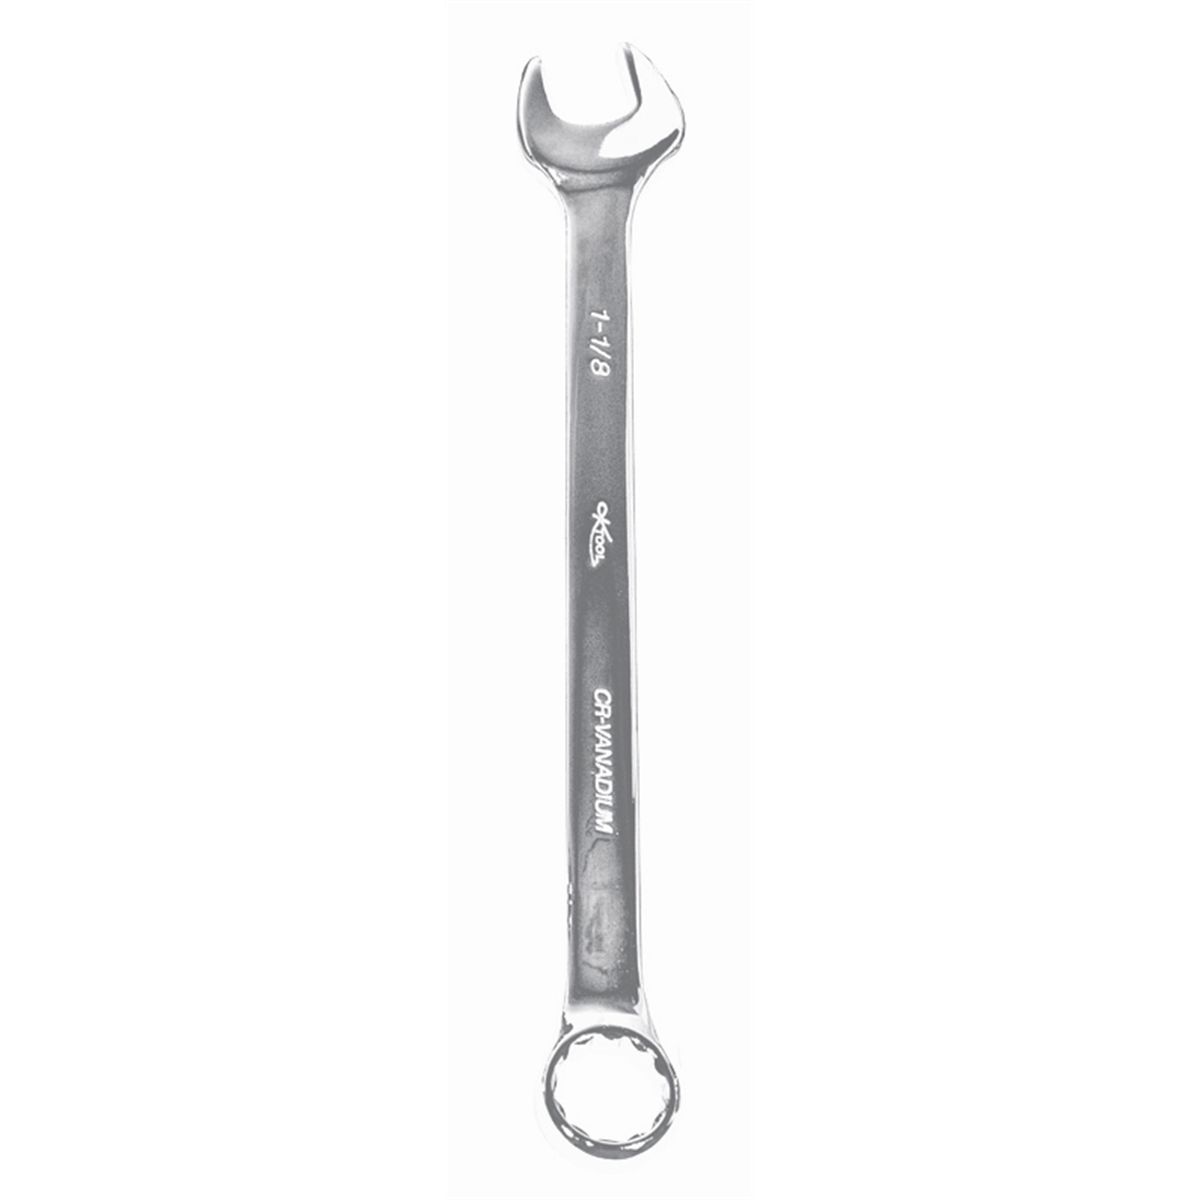 12 Point High Polish Combination Wrench, 1-1/8"